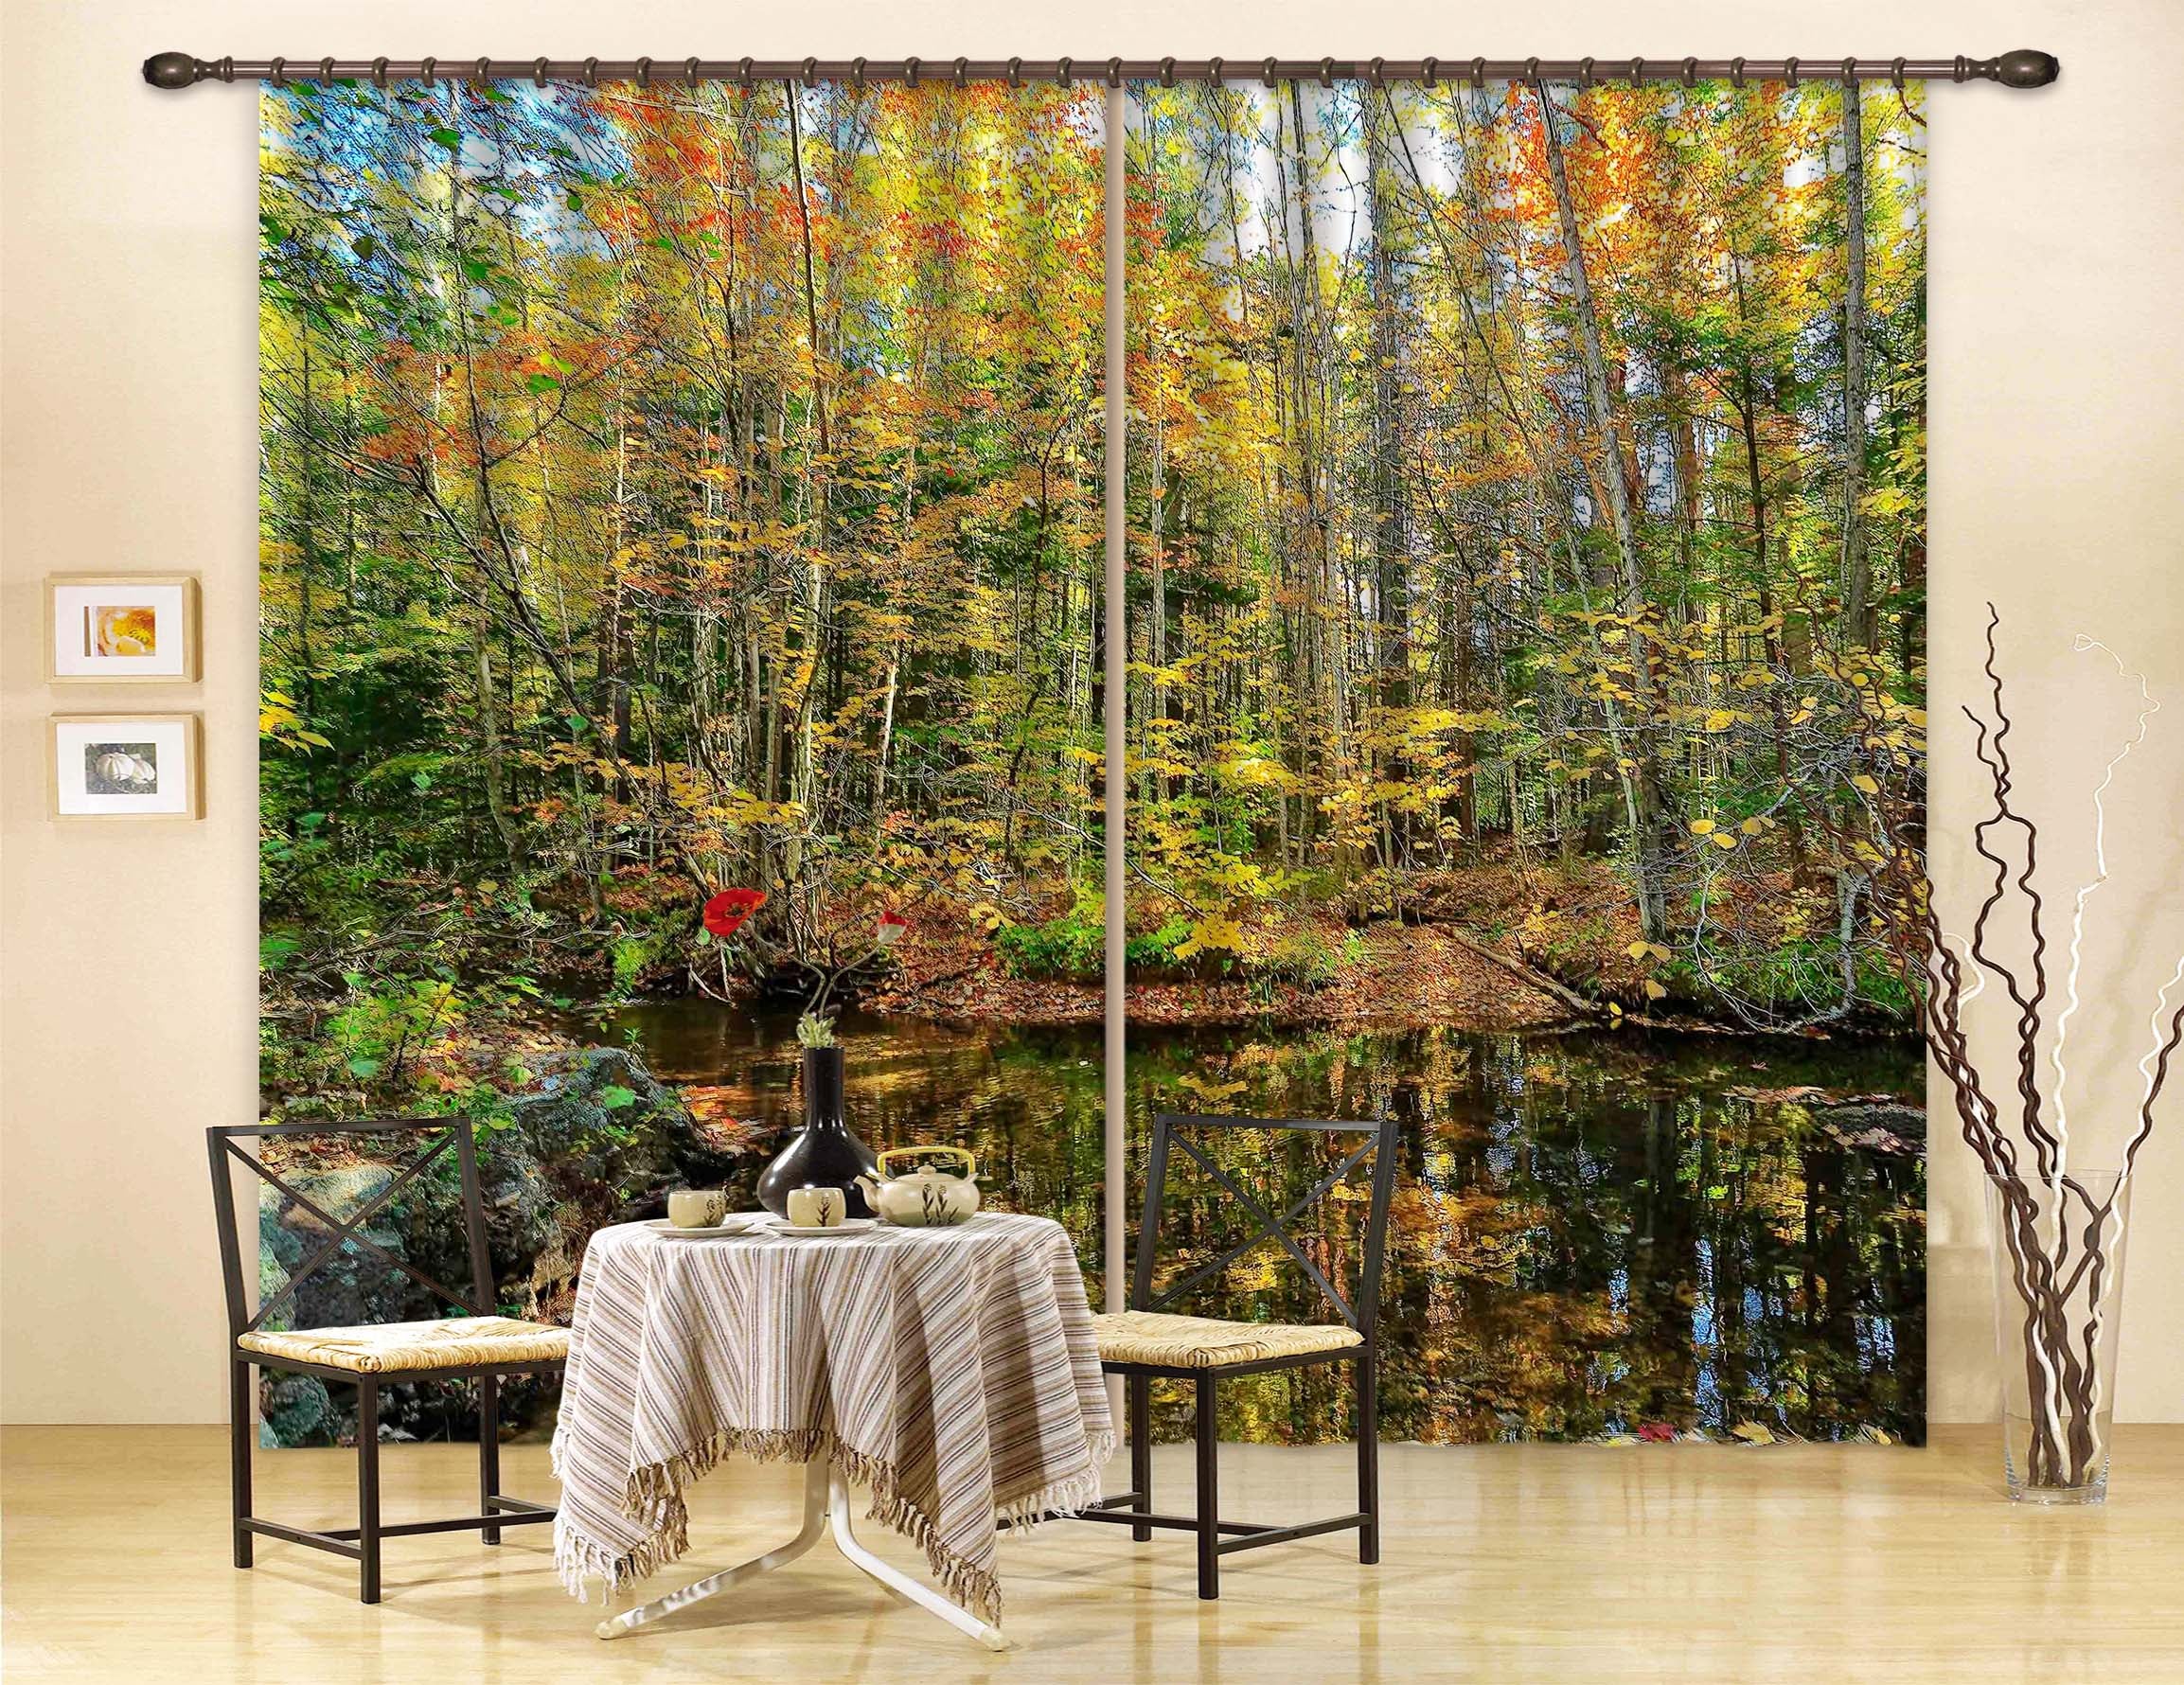 3D Pond Reflections 61233 Kathy Barefield Curtain Curtains Drapes